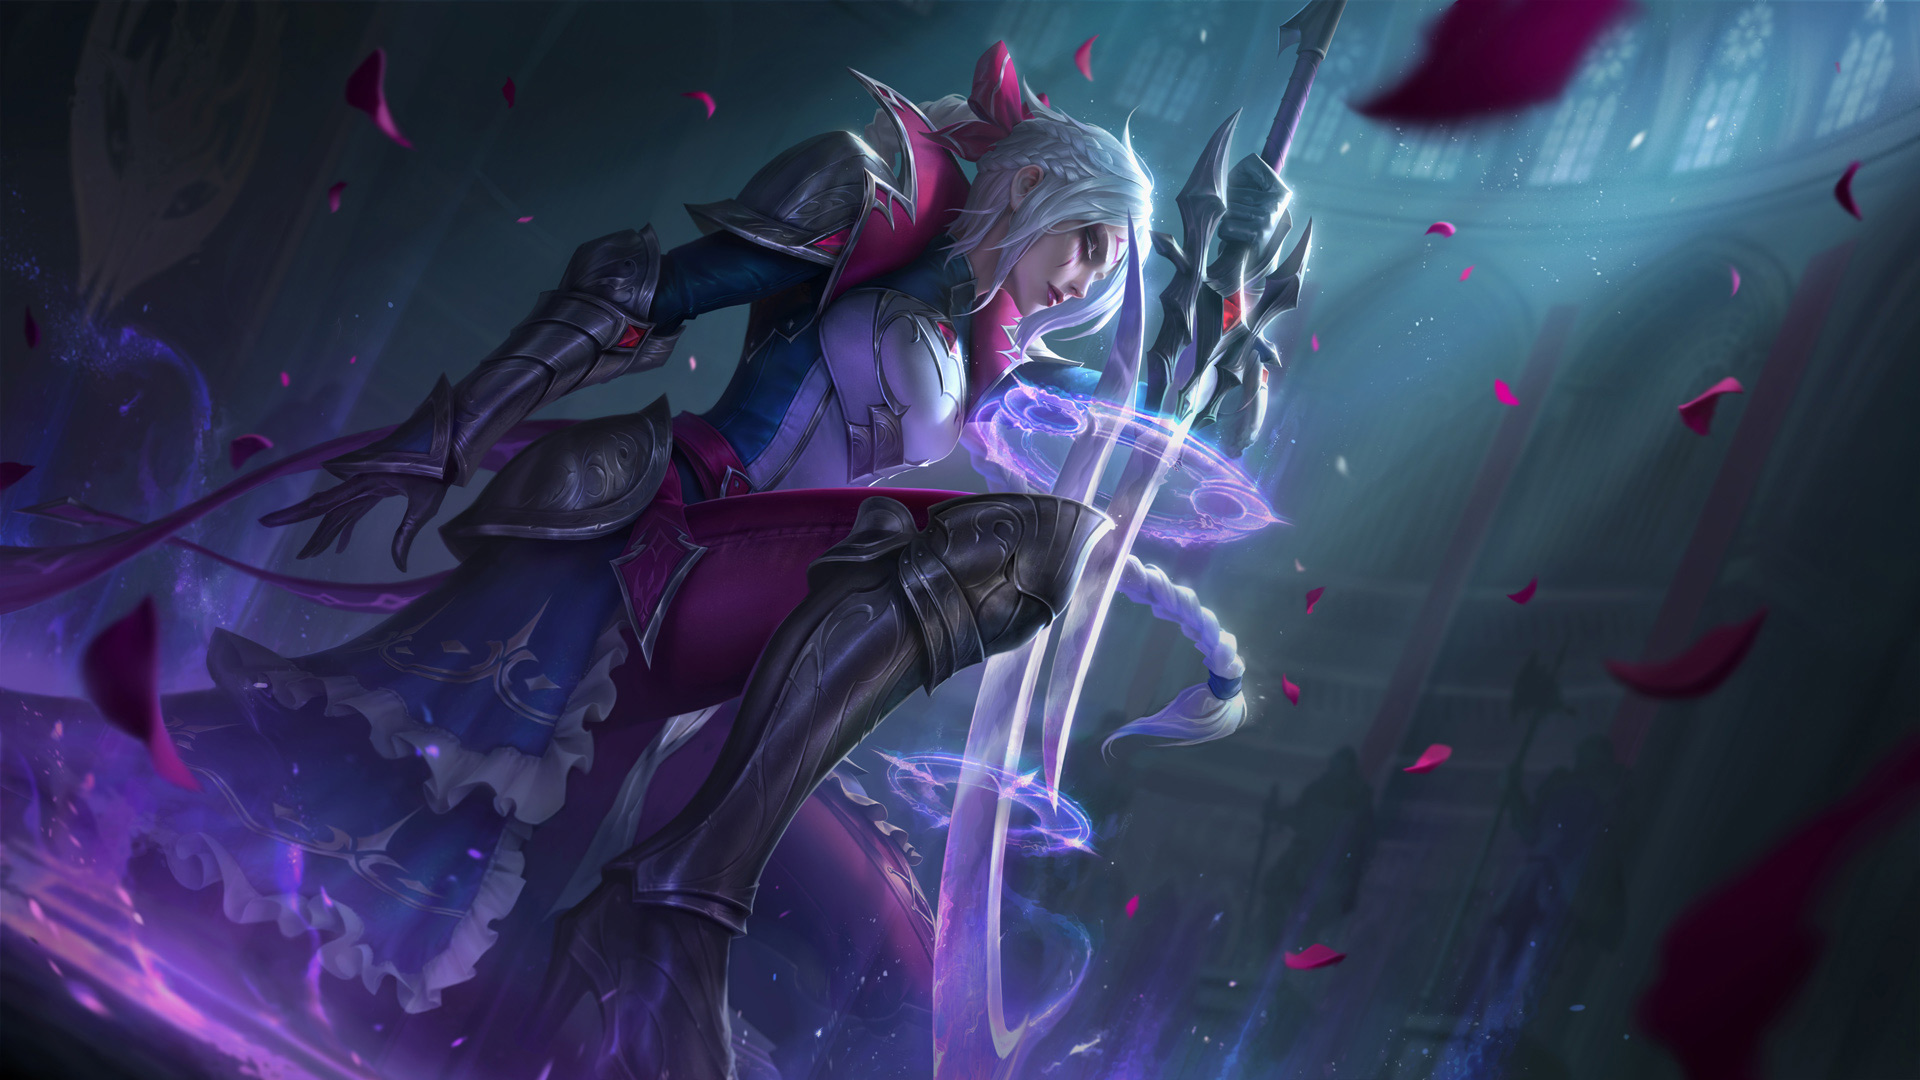 Anime 1920x1080 Battle Queen League of Legends Diana (League of Legends) PC gaming sword weapon armor fantasy girl video game characters video game girls women with swords girls with guns